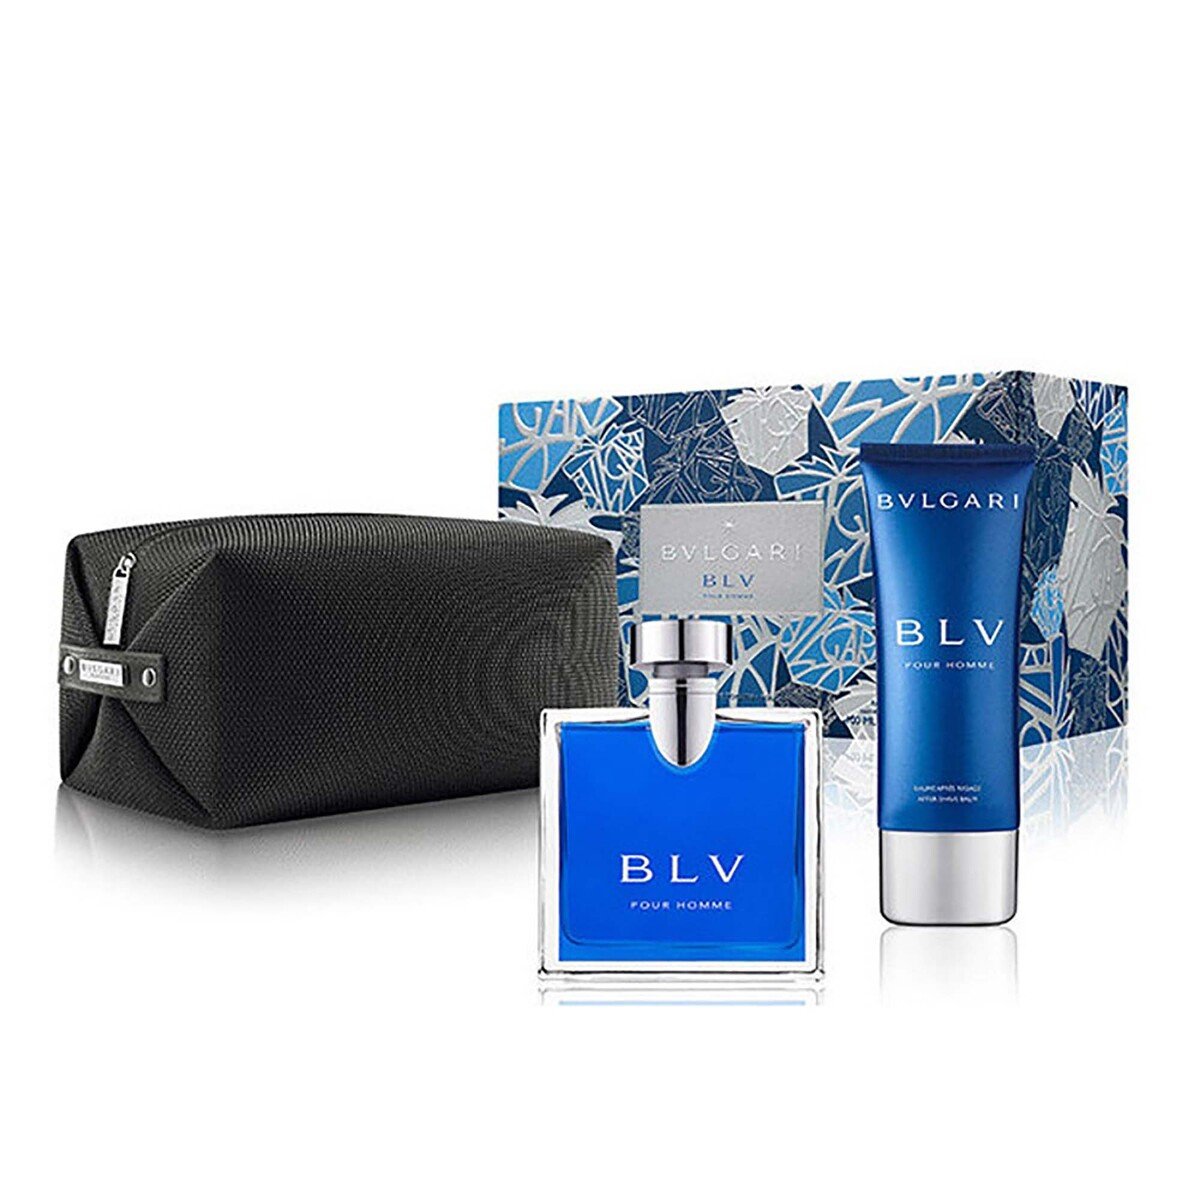 Bvlgari BLV Eau De Toilette And After Shave Balm With Pouch Soft Box Gift Set